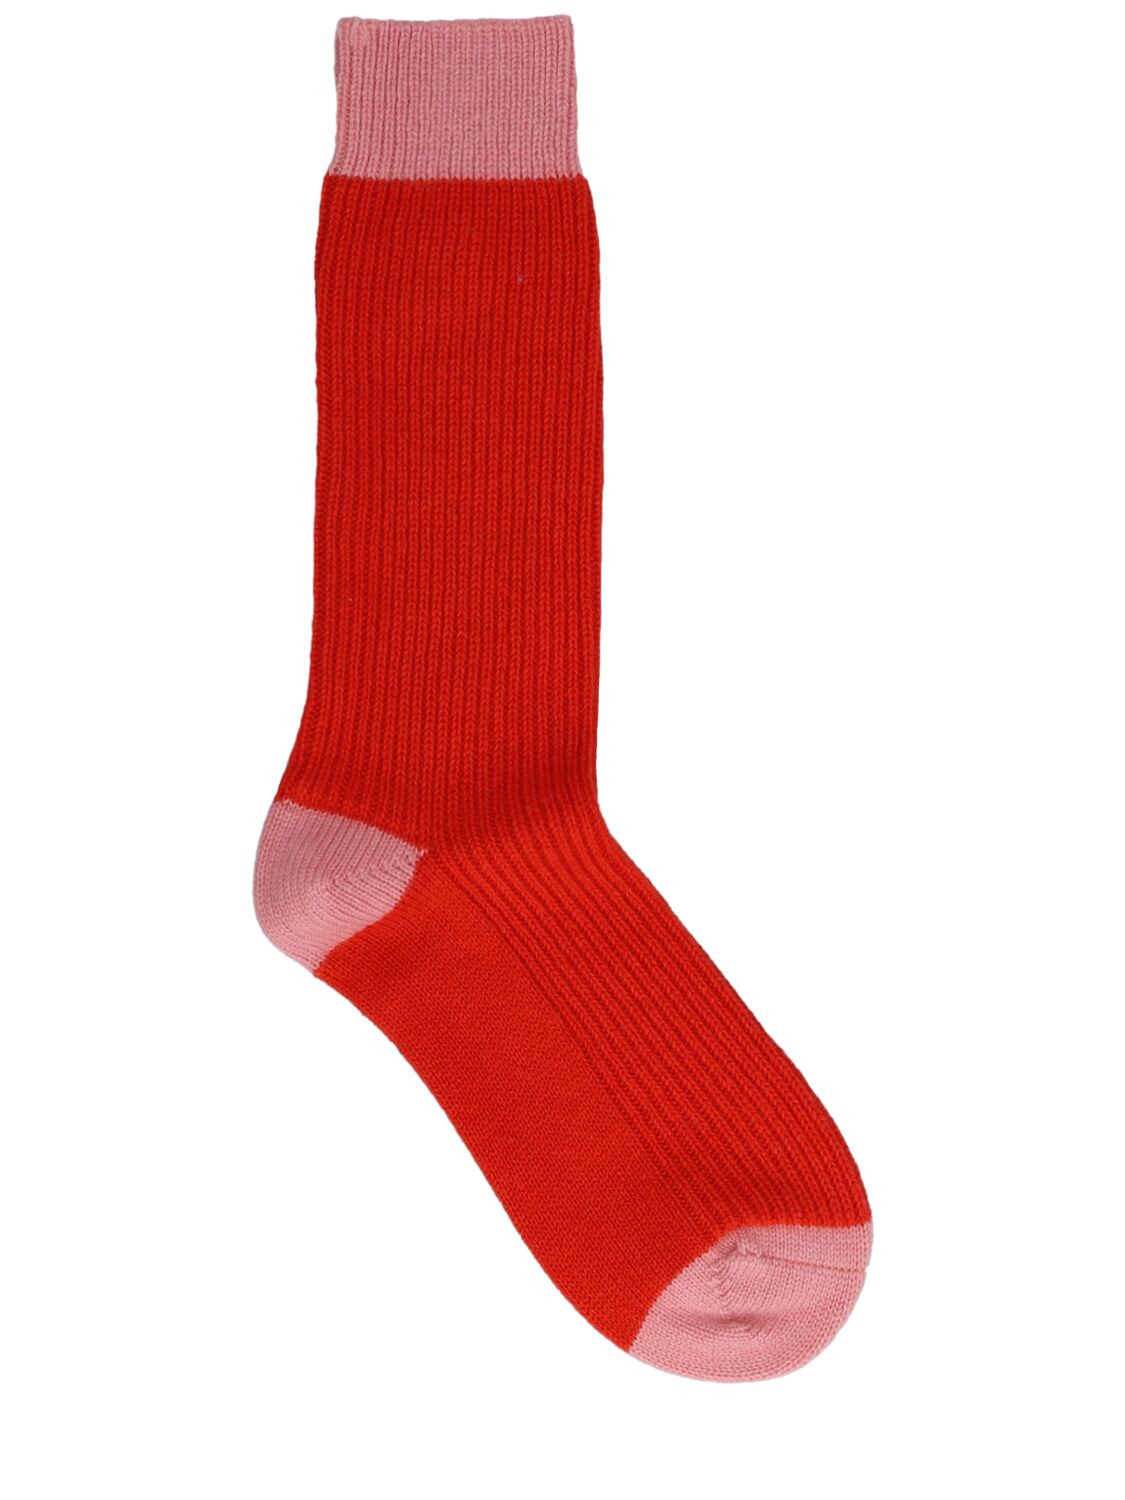 Guest In Residence The Soft Cashmere Socks In Red,pink